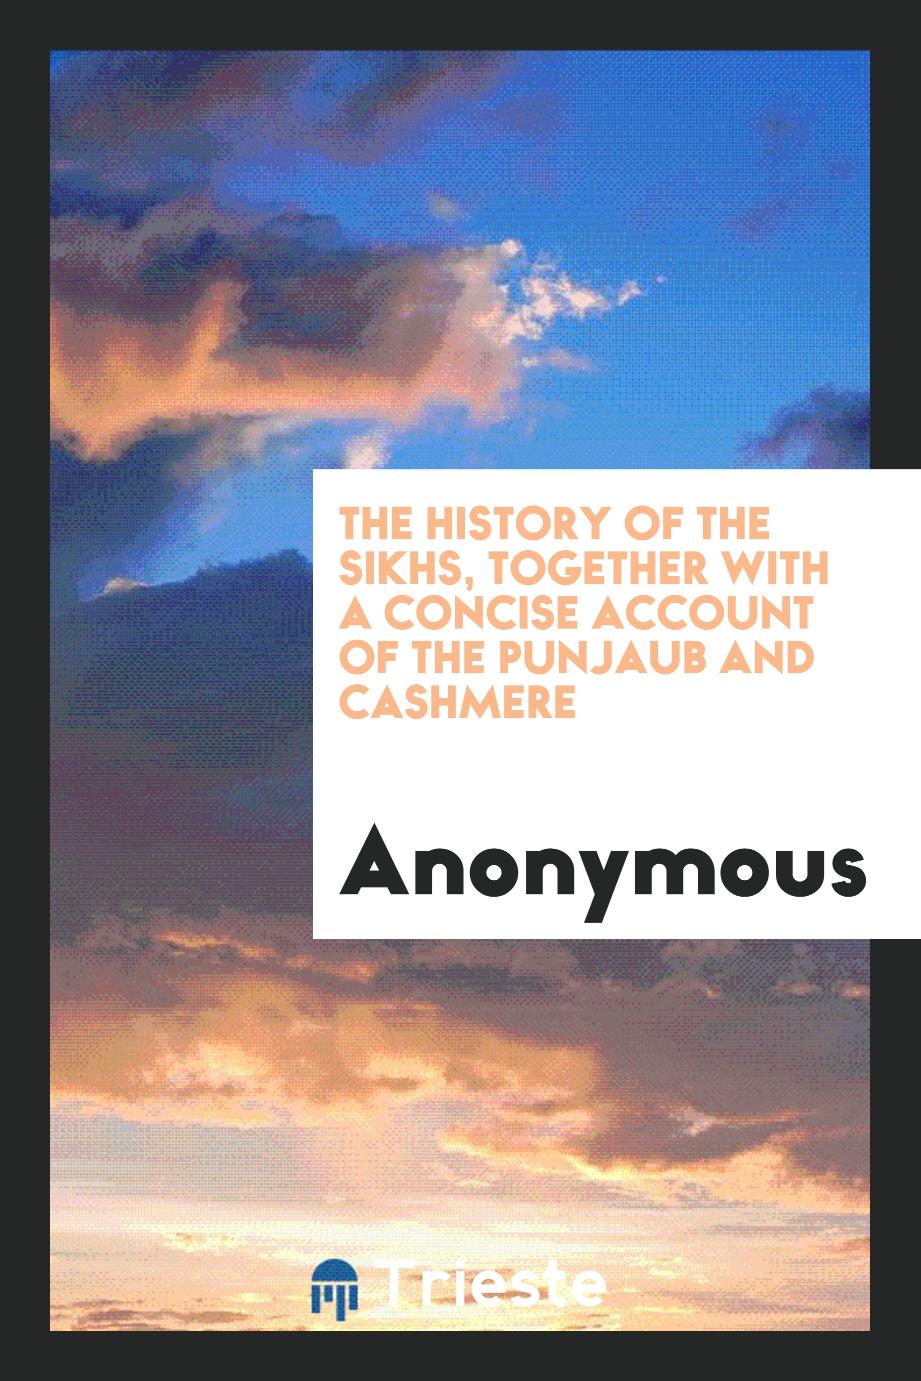 The History of the Sikhs, Together with a Concise Account of the Punjaub and Cashmere